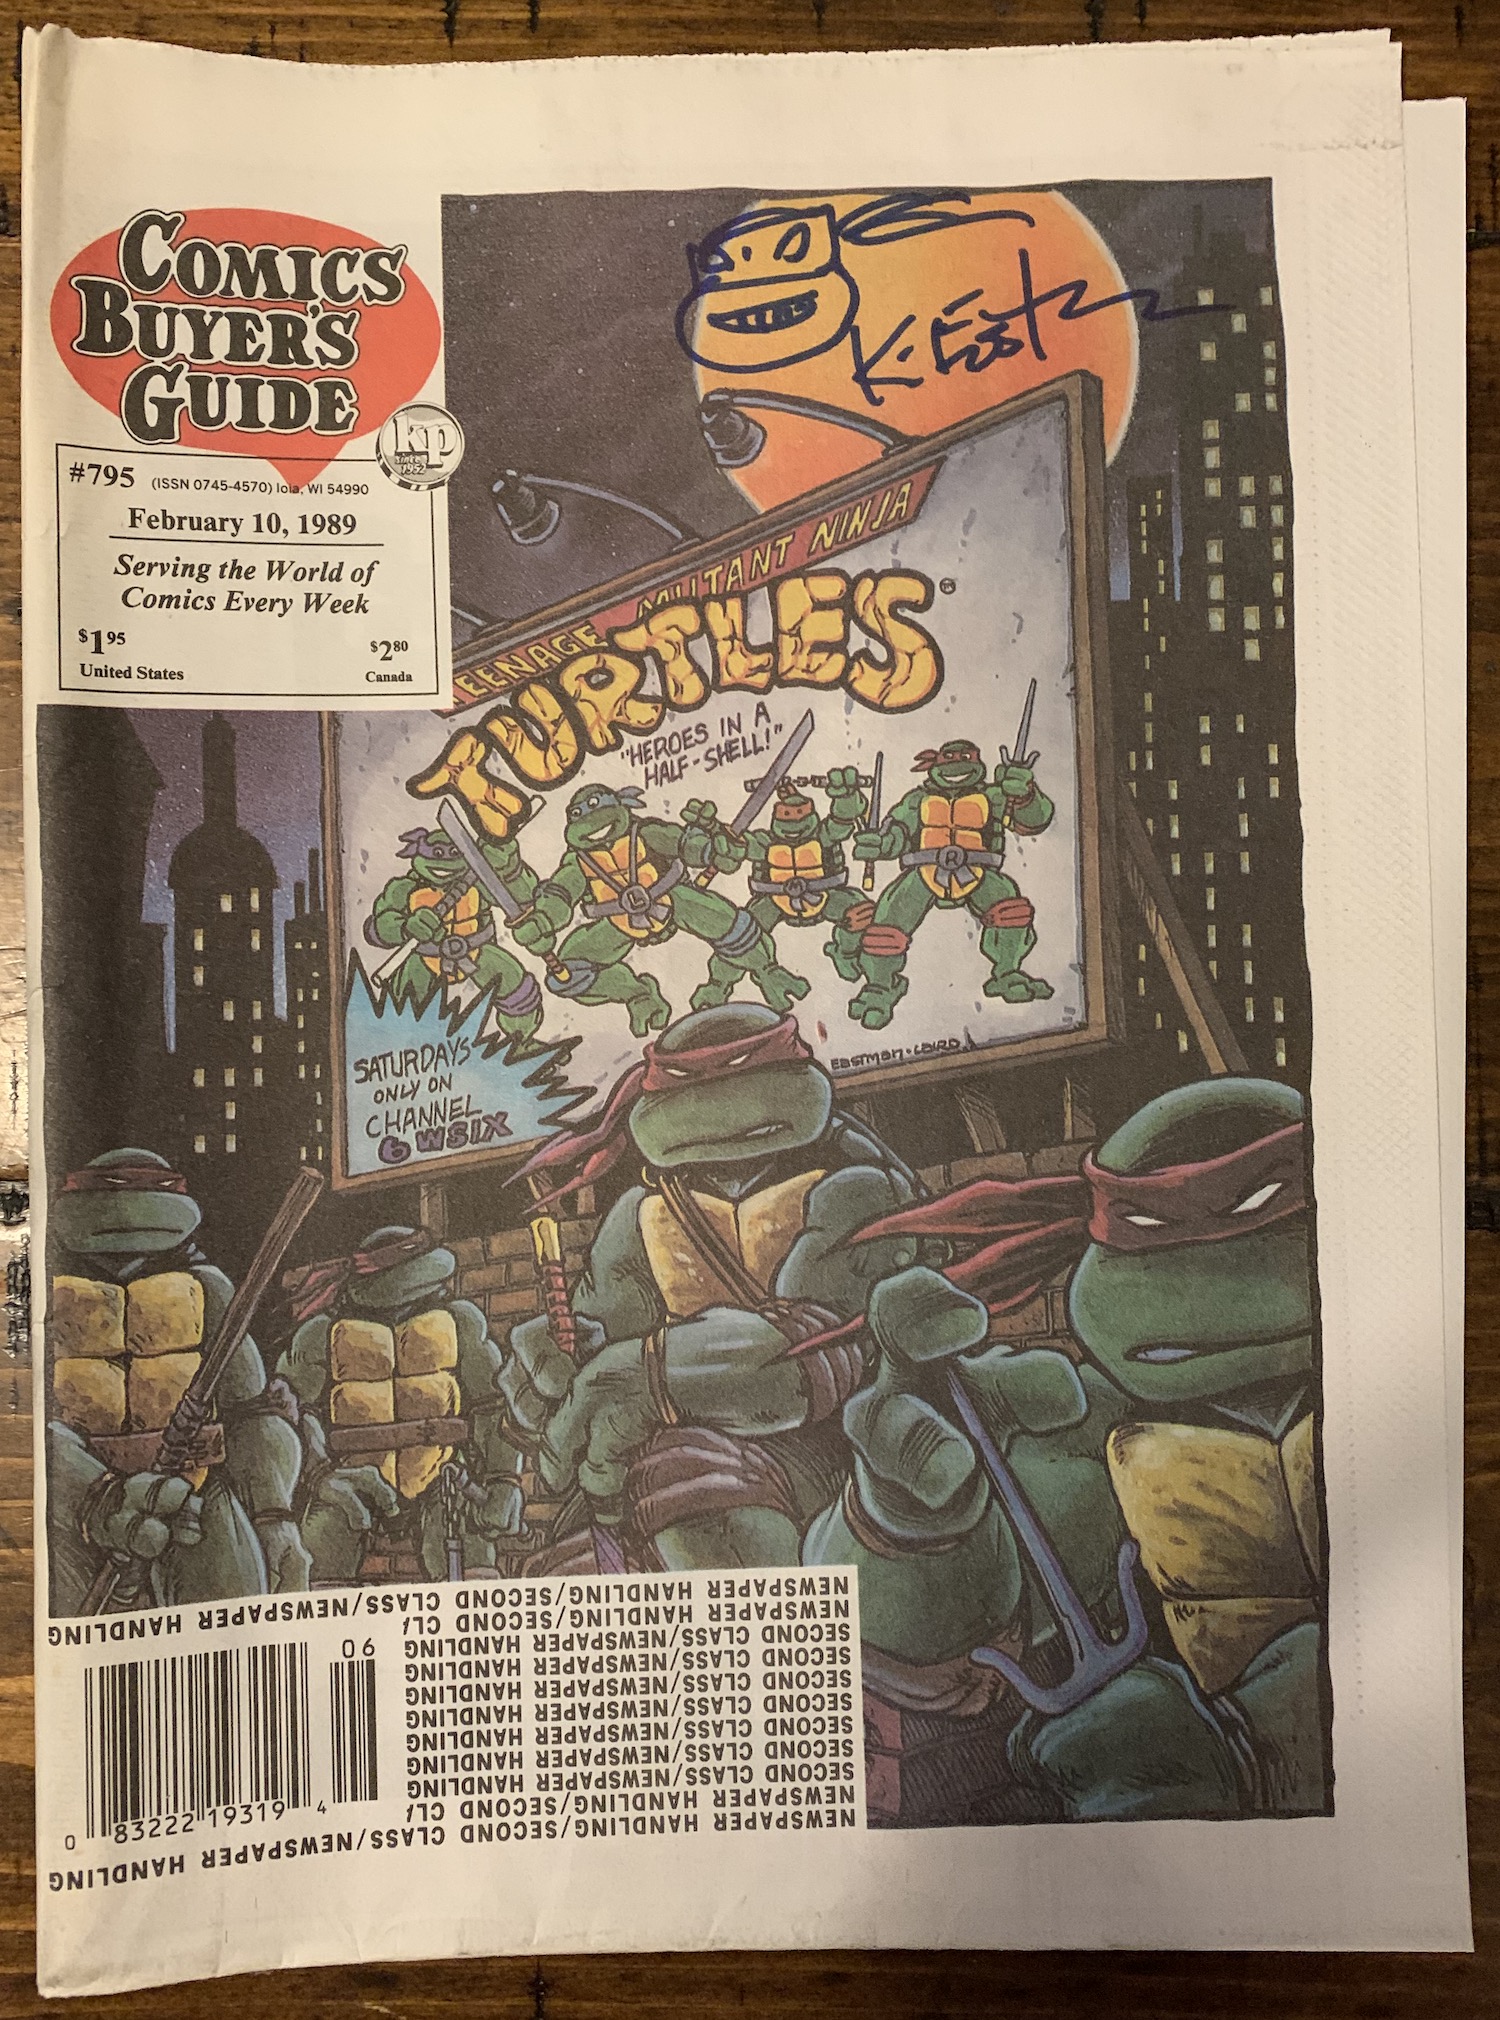 Comics Buyer’s Guide, Issue #795 – Special Turtles Issue – SIGNED